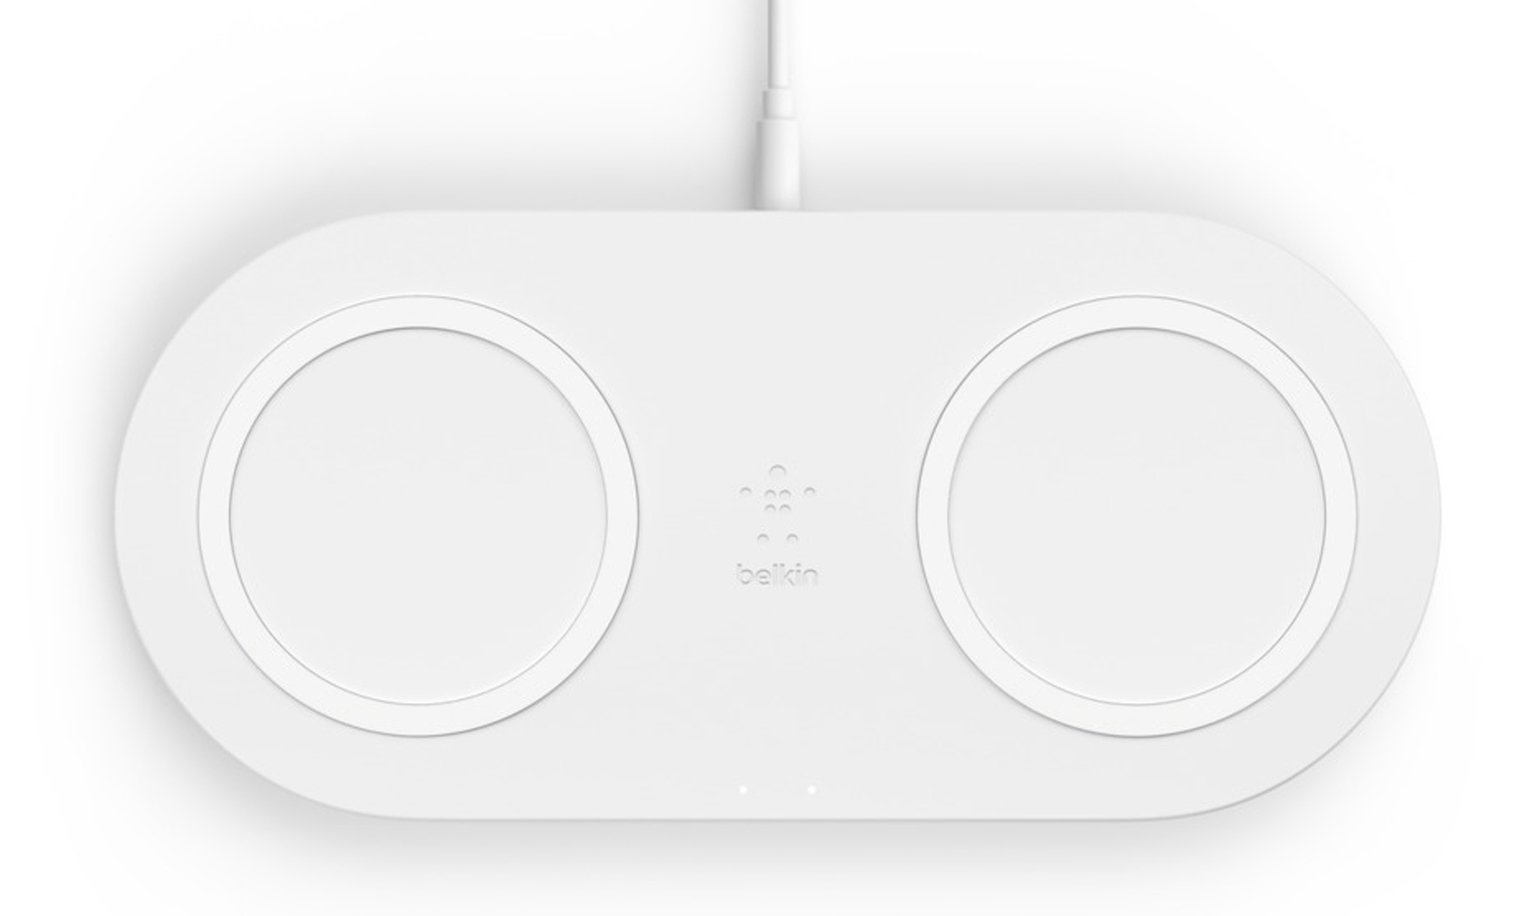 Belkin 10W Qi Dual Wireless Charger Pad Incl. Plug Review